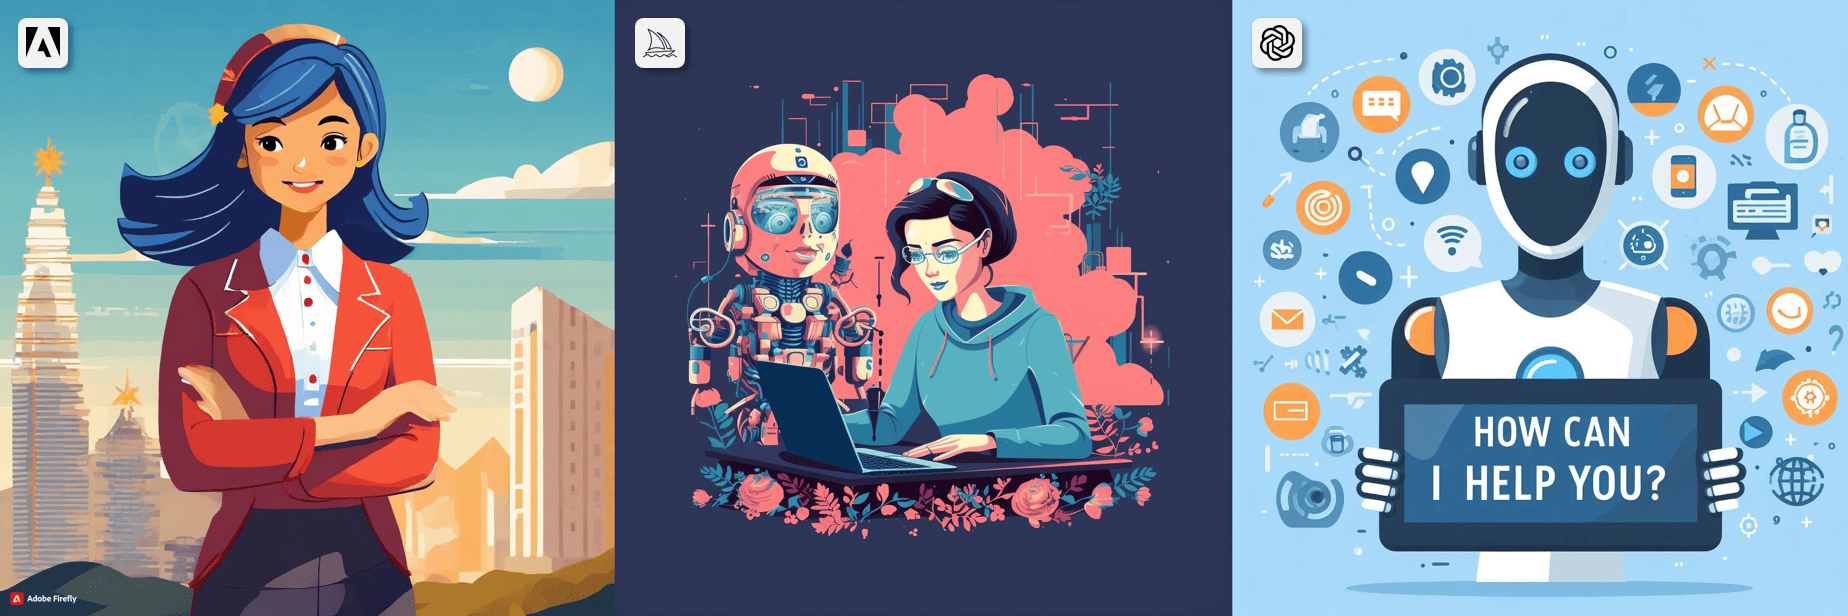 A flat vector illustration of an ai assistant